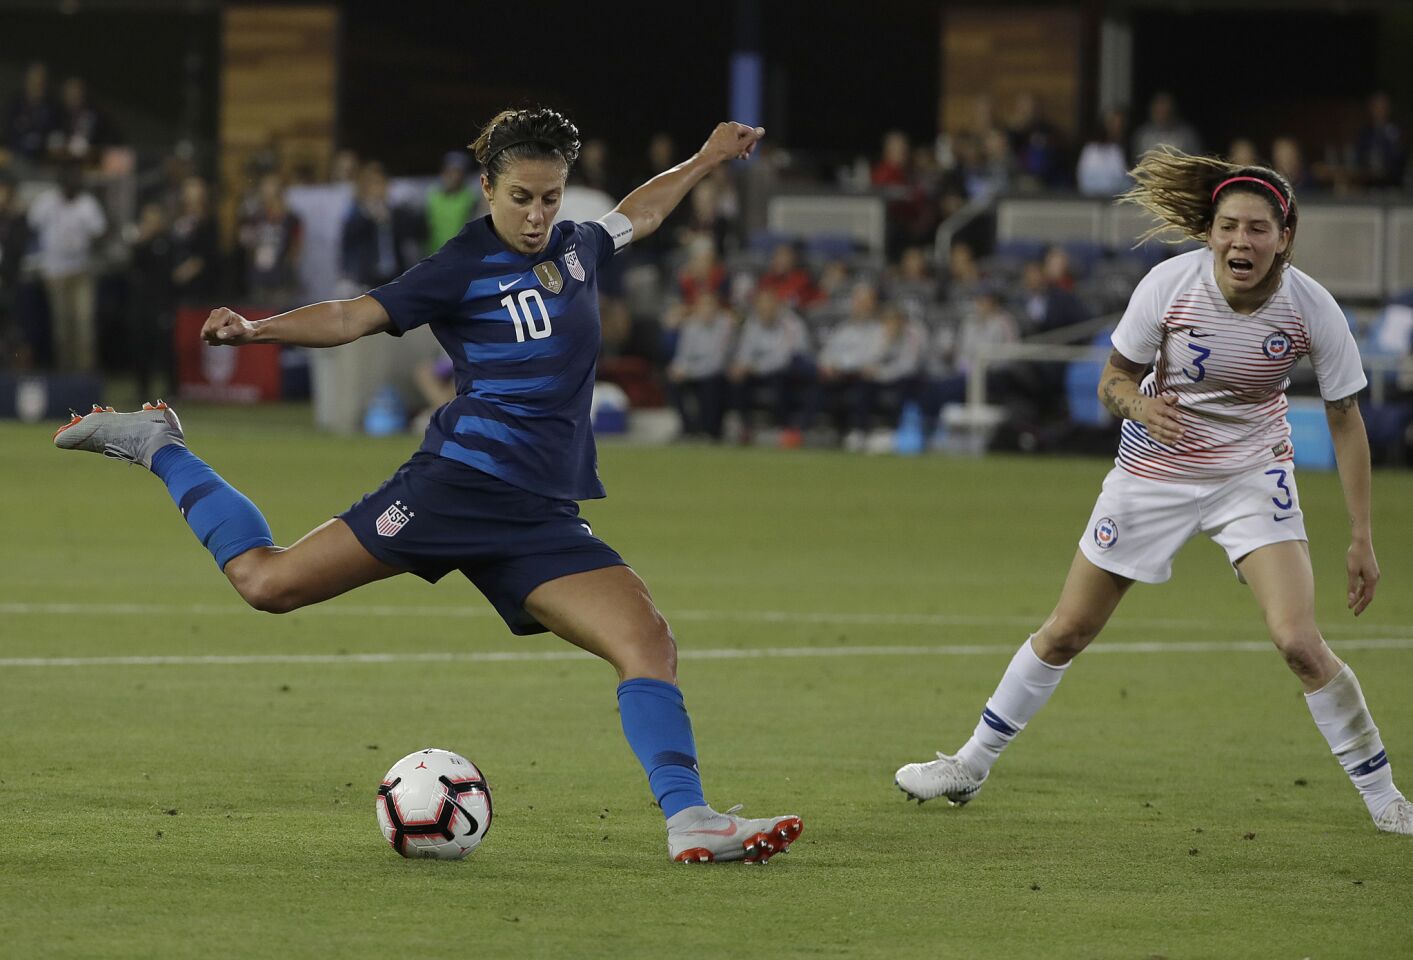 United States' Carli Lloyd (10) kicks the ball past Chile's Carla Guerrero to score a goal during the second half of an international friendly soccer match in San Jose, Calif., Tuesday, Sept. 4, 2018. (AP Photo/Jeff Chiu)